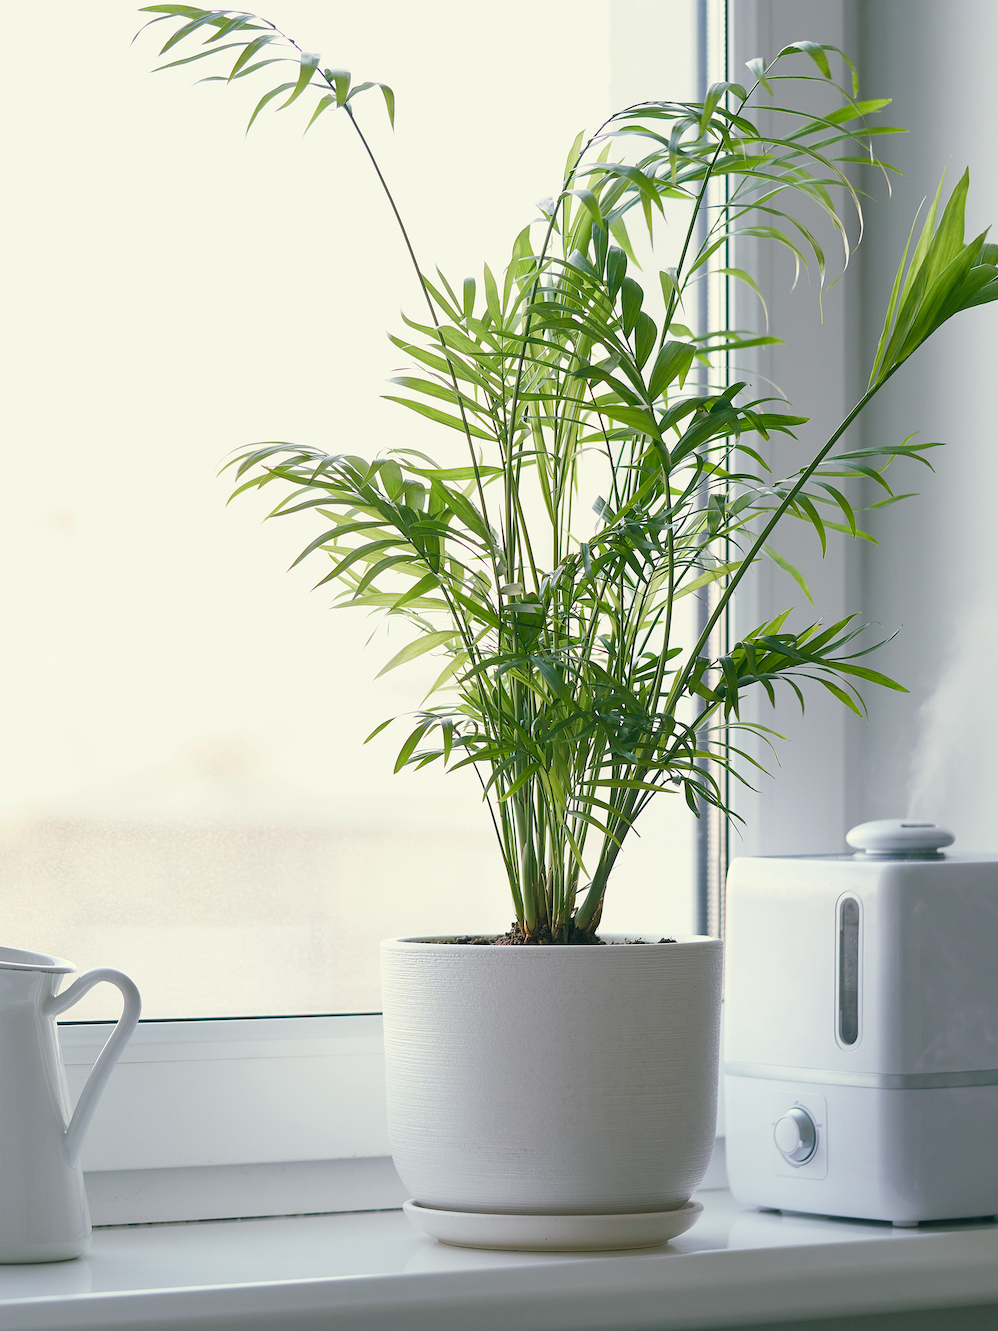 Humidifier and flower Chamaedorea in pot on window. Increase in air humidity in room or office